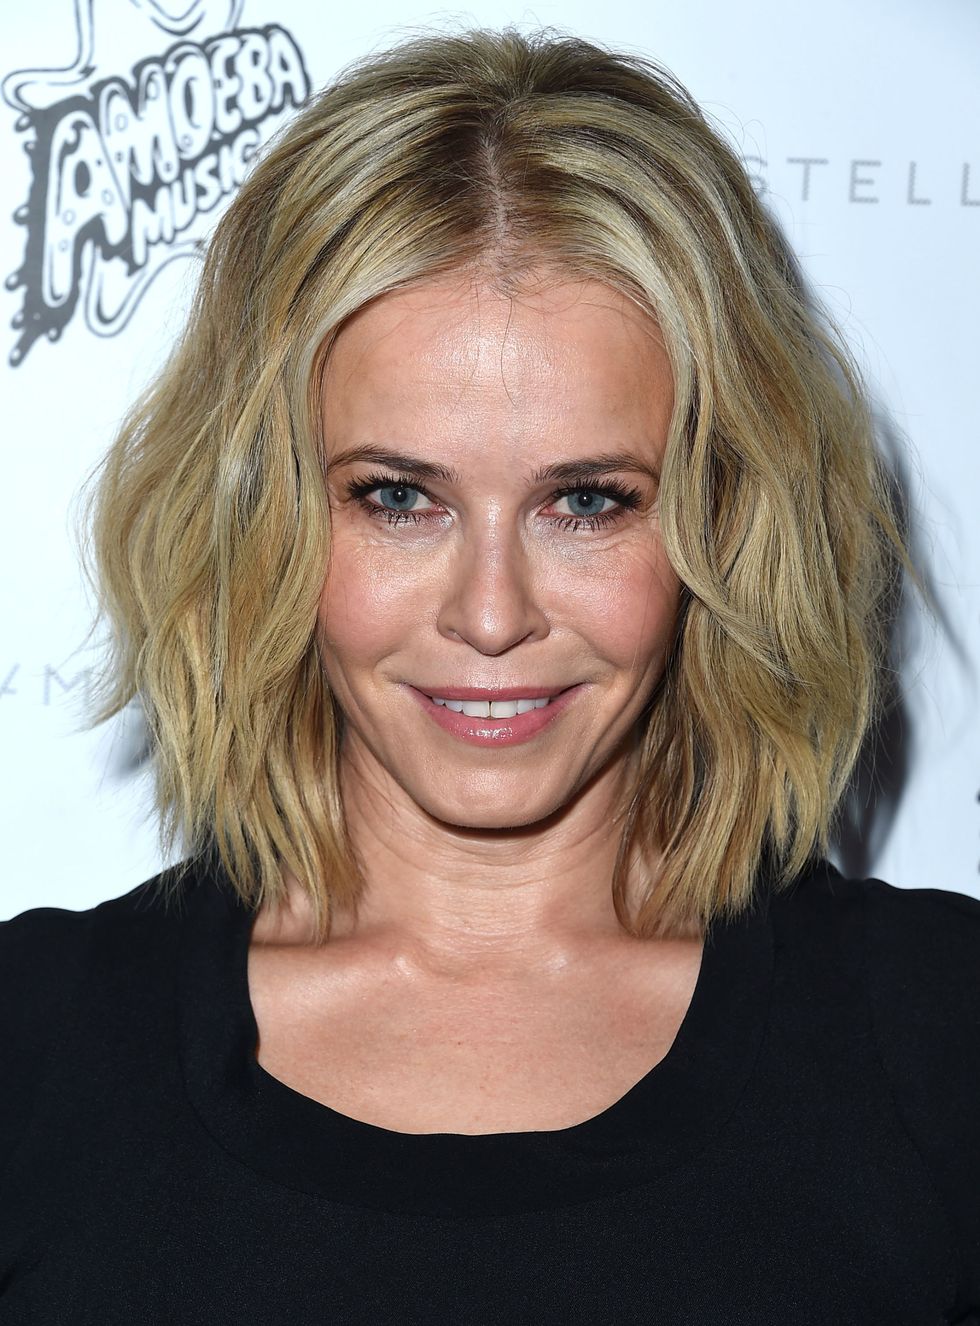 <p>At this point, Chelsea Handler is not really sure that marriage is or will ever be for her. "I've never been proposed to, and I don't know that that's in my future," she said <a href="http://www.more.com/chelsea-handler-may-2012?page=5">in 2012.</a> "I don't know that I'm marriage material. I don't know if I would ever want to be someone's wife. It makes breaking up much more complicated." </p>